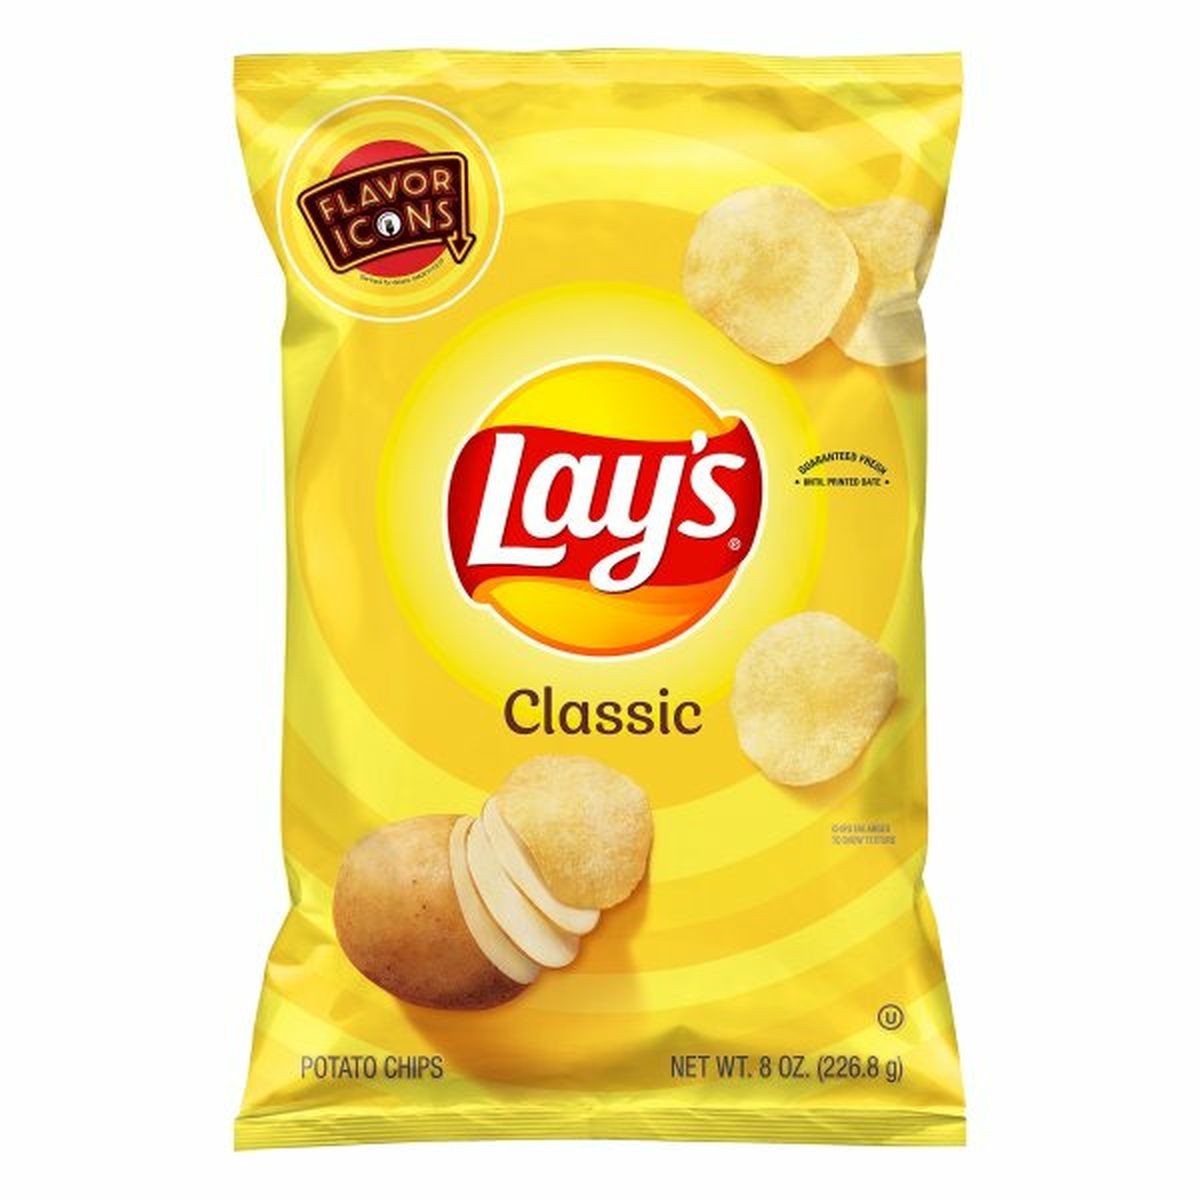 Calories in Lay's Potato Chips, Classic